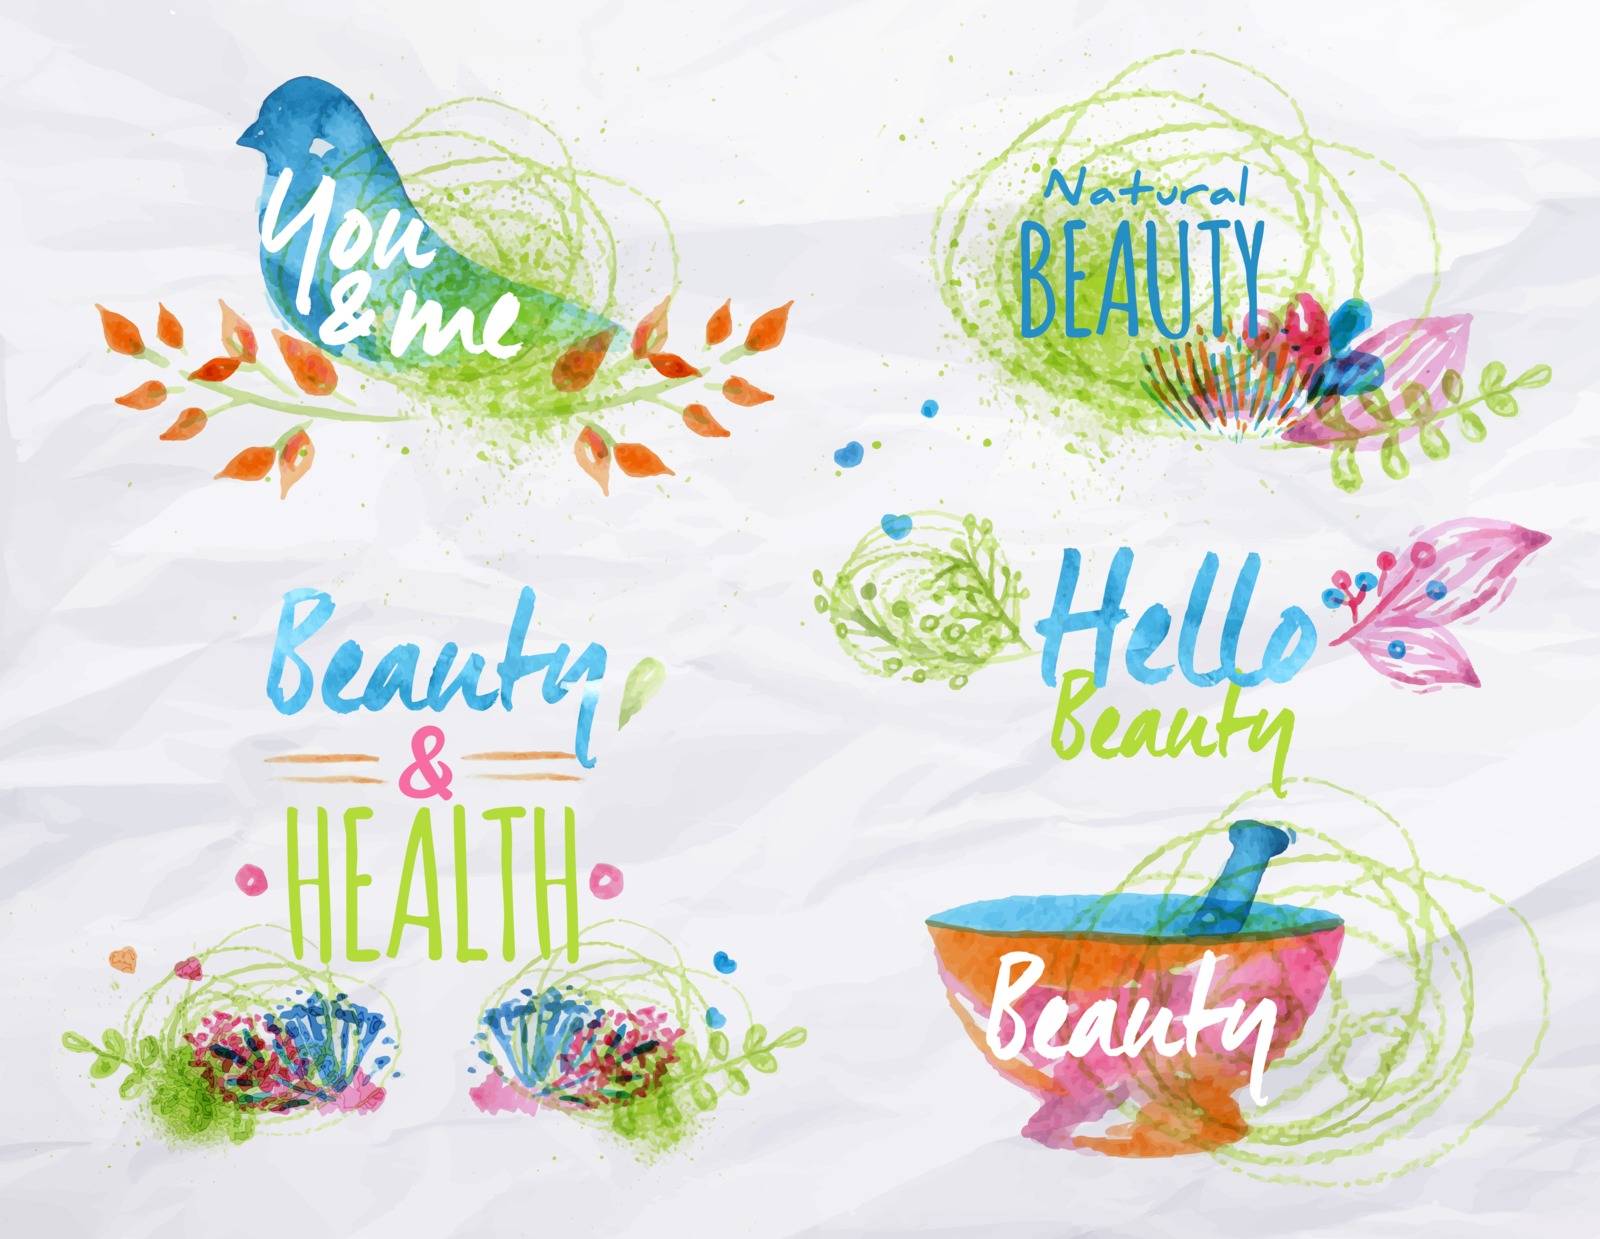 Watercolor symbols elements on beauty bright flowers twigs nature stylized as freehand drawing with watercolor